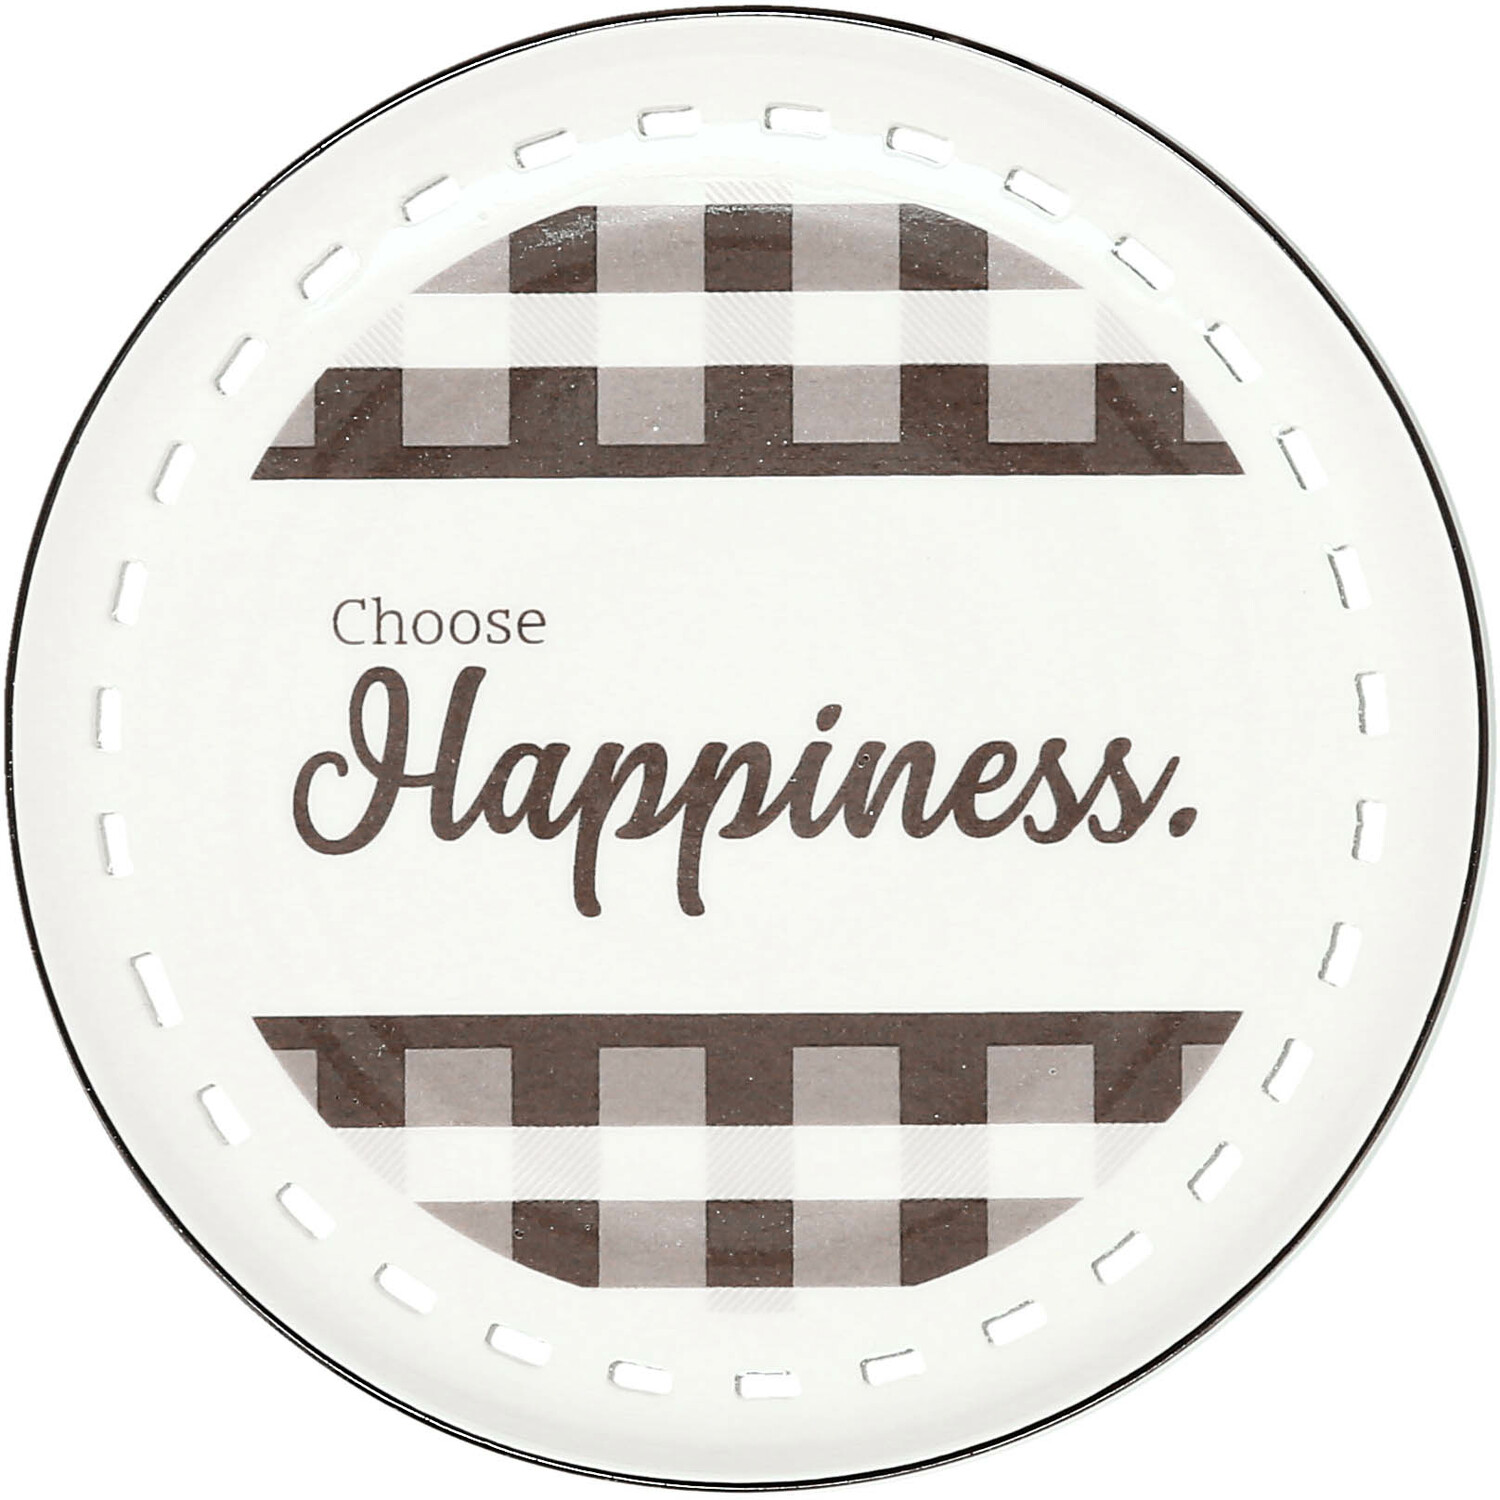 Happiness by Farmhouse Family - Happiness - 5" Appetizer Plate